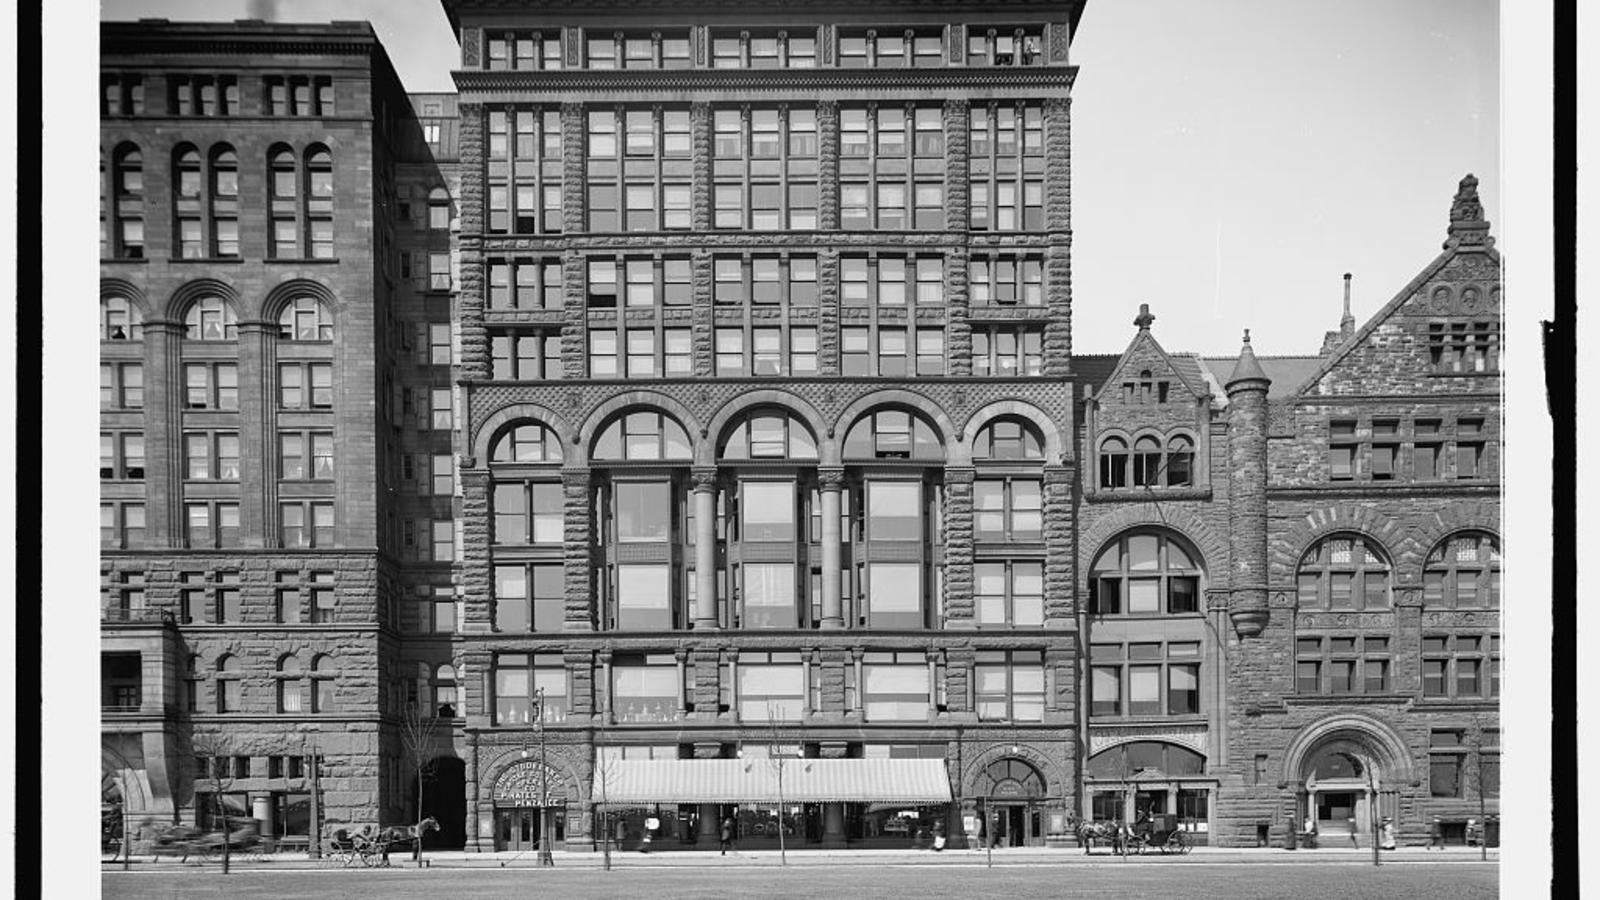 A black and white photograph of a ten story brick building built in Richardson Romanesque style.